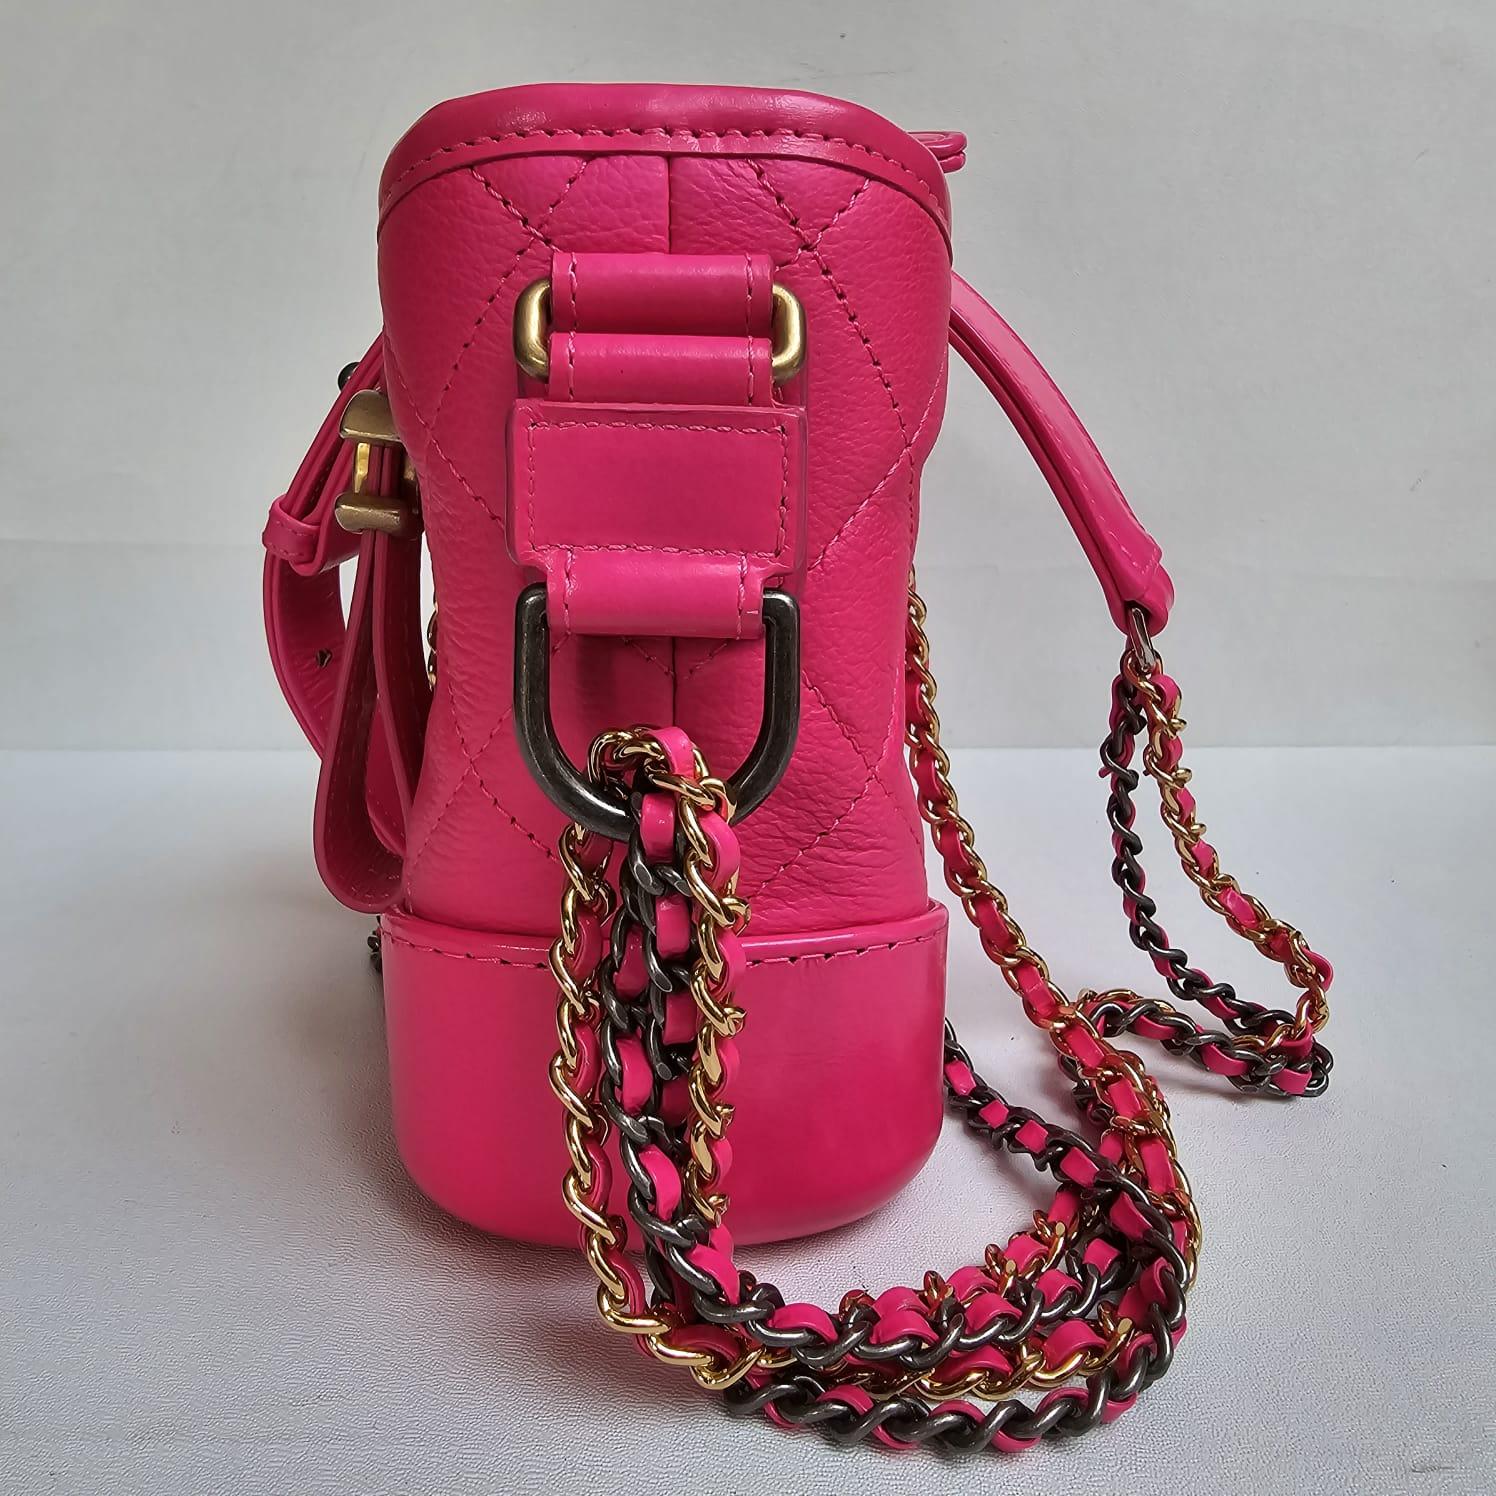 Chanel Neon Pink Small Gabrielle Bag For Sale 5